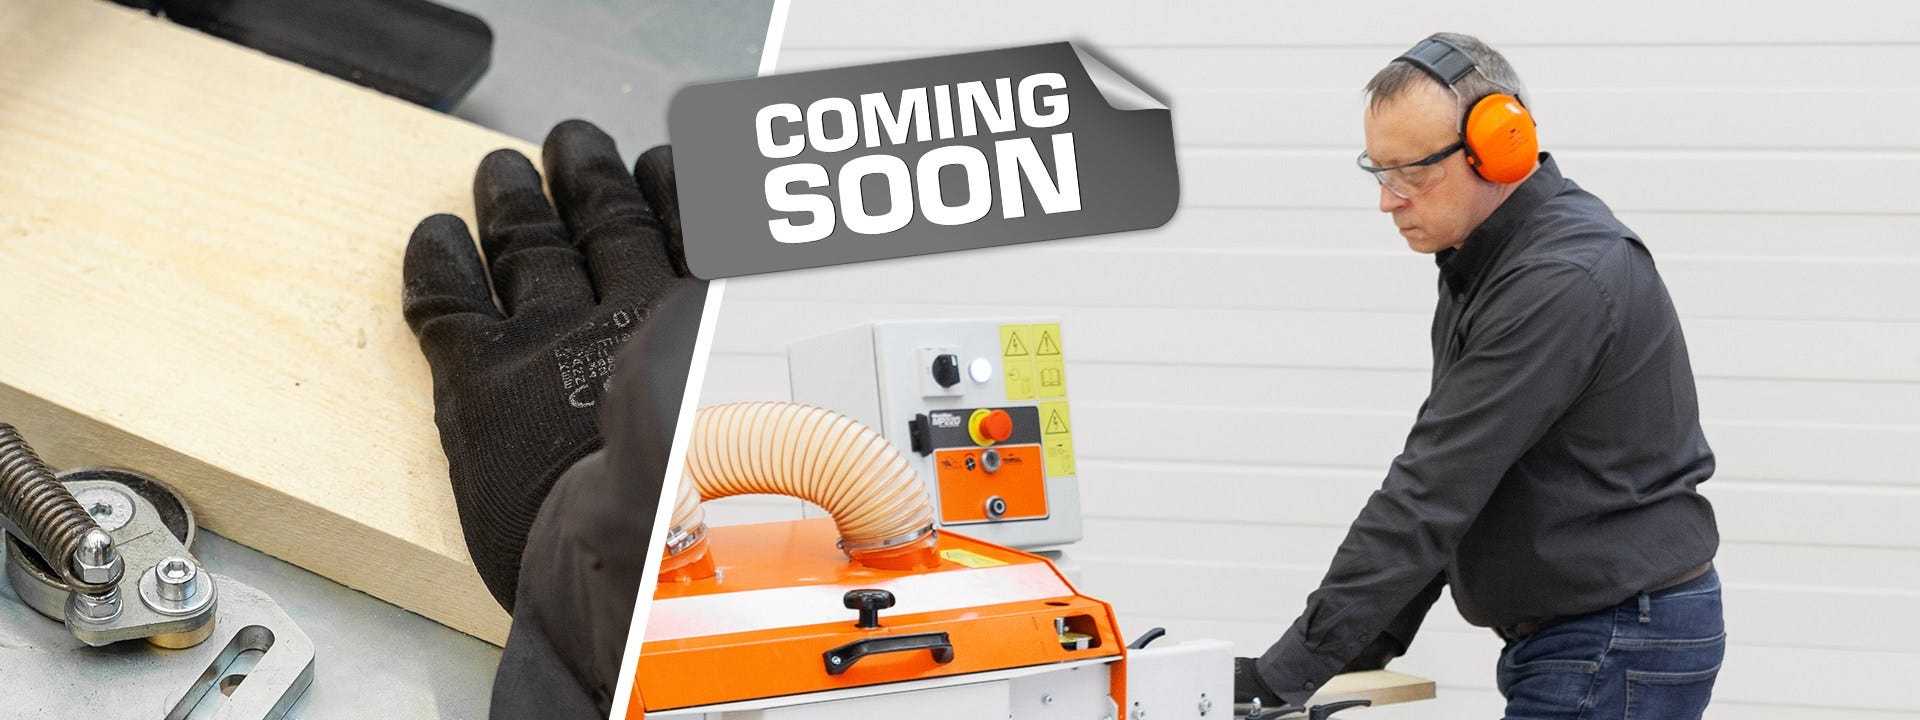 New Wood-Mizer woodworking machine is coming soon